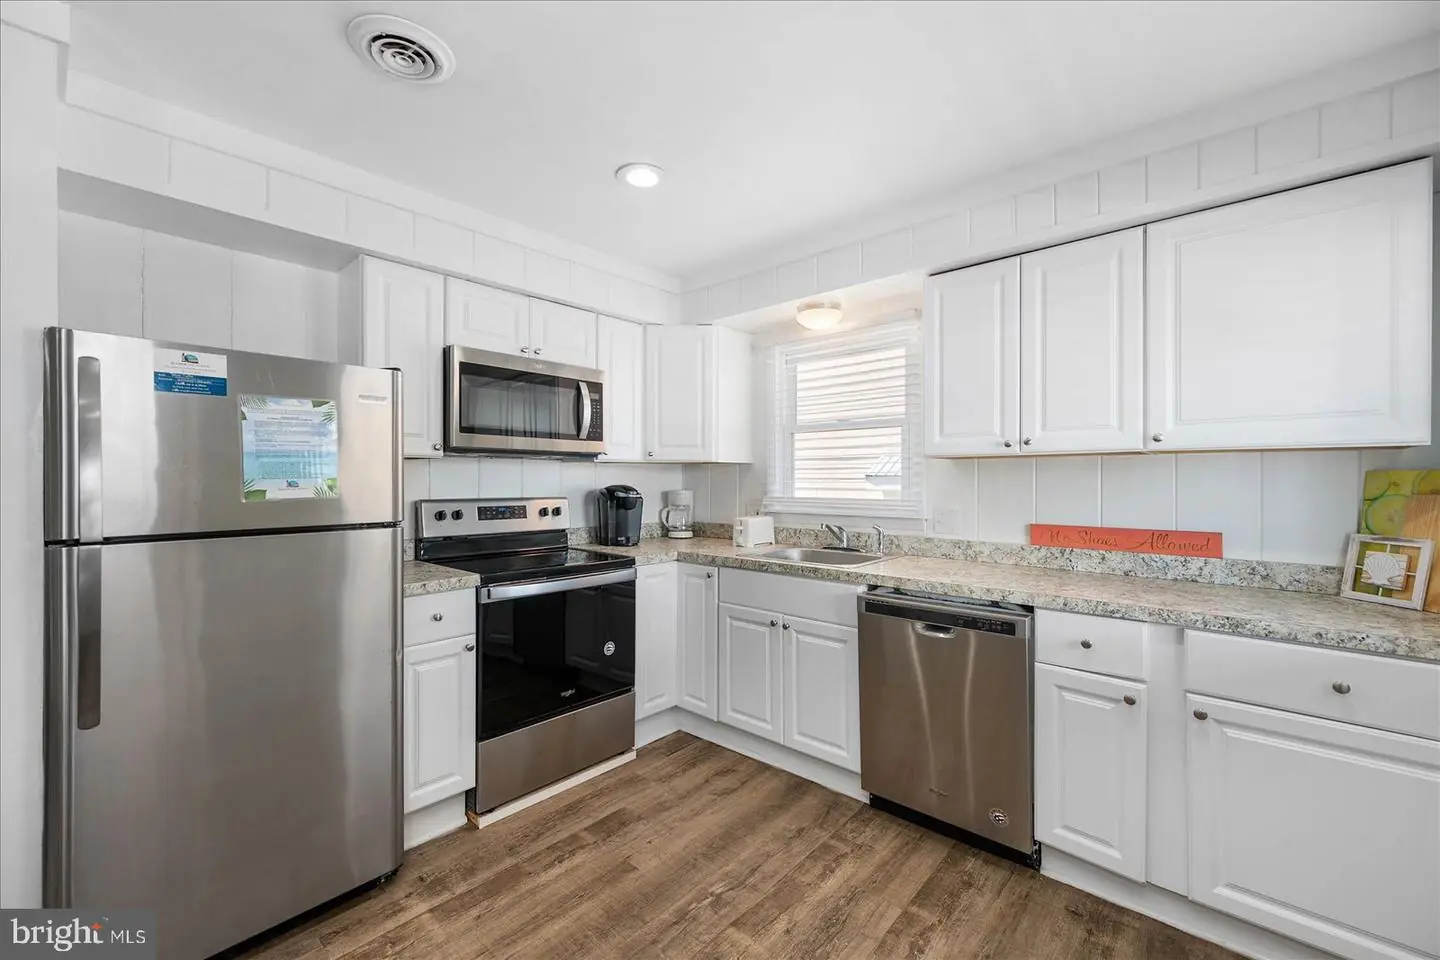 MDWO2019490-802929059952-2024-03-16-10-46-20 15 57th St | Ocean City, MD Real Estate For Sale | MLS# Mdwo2019490  - 1st Choice Properties